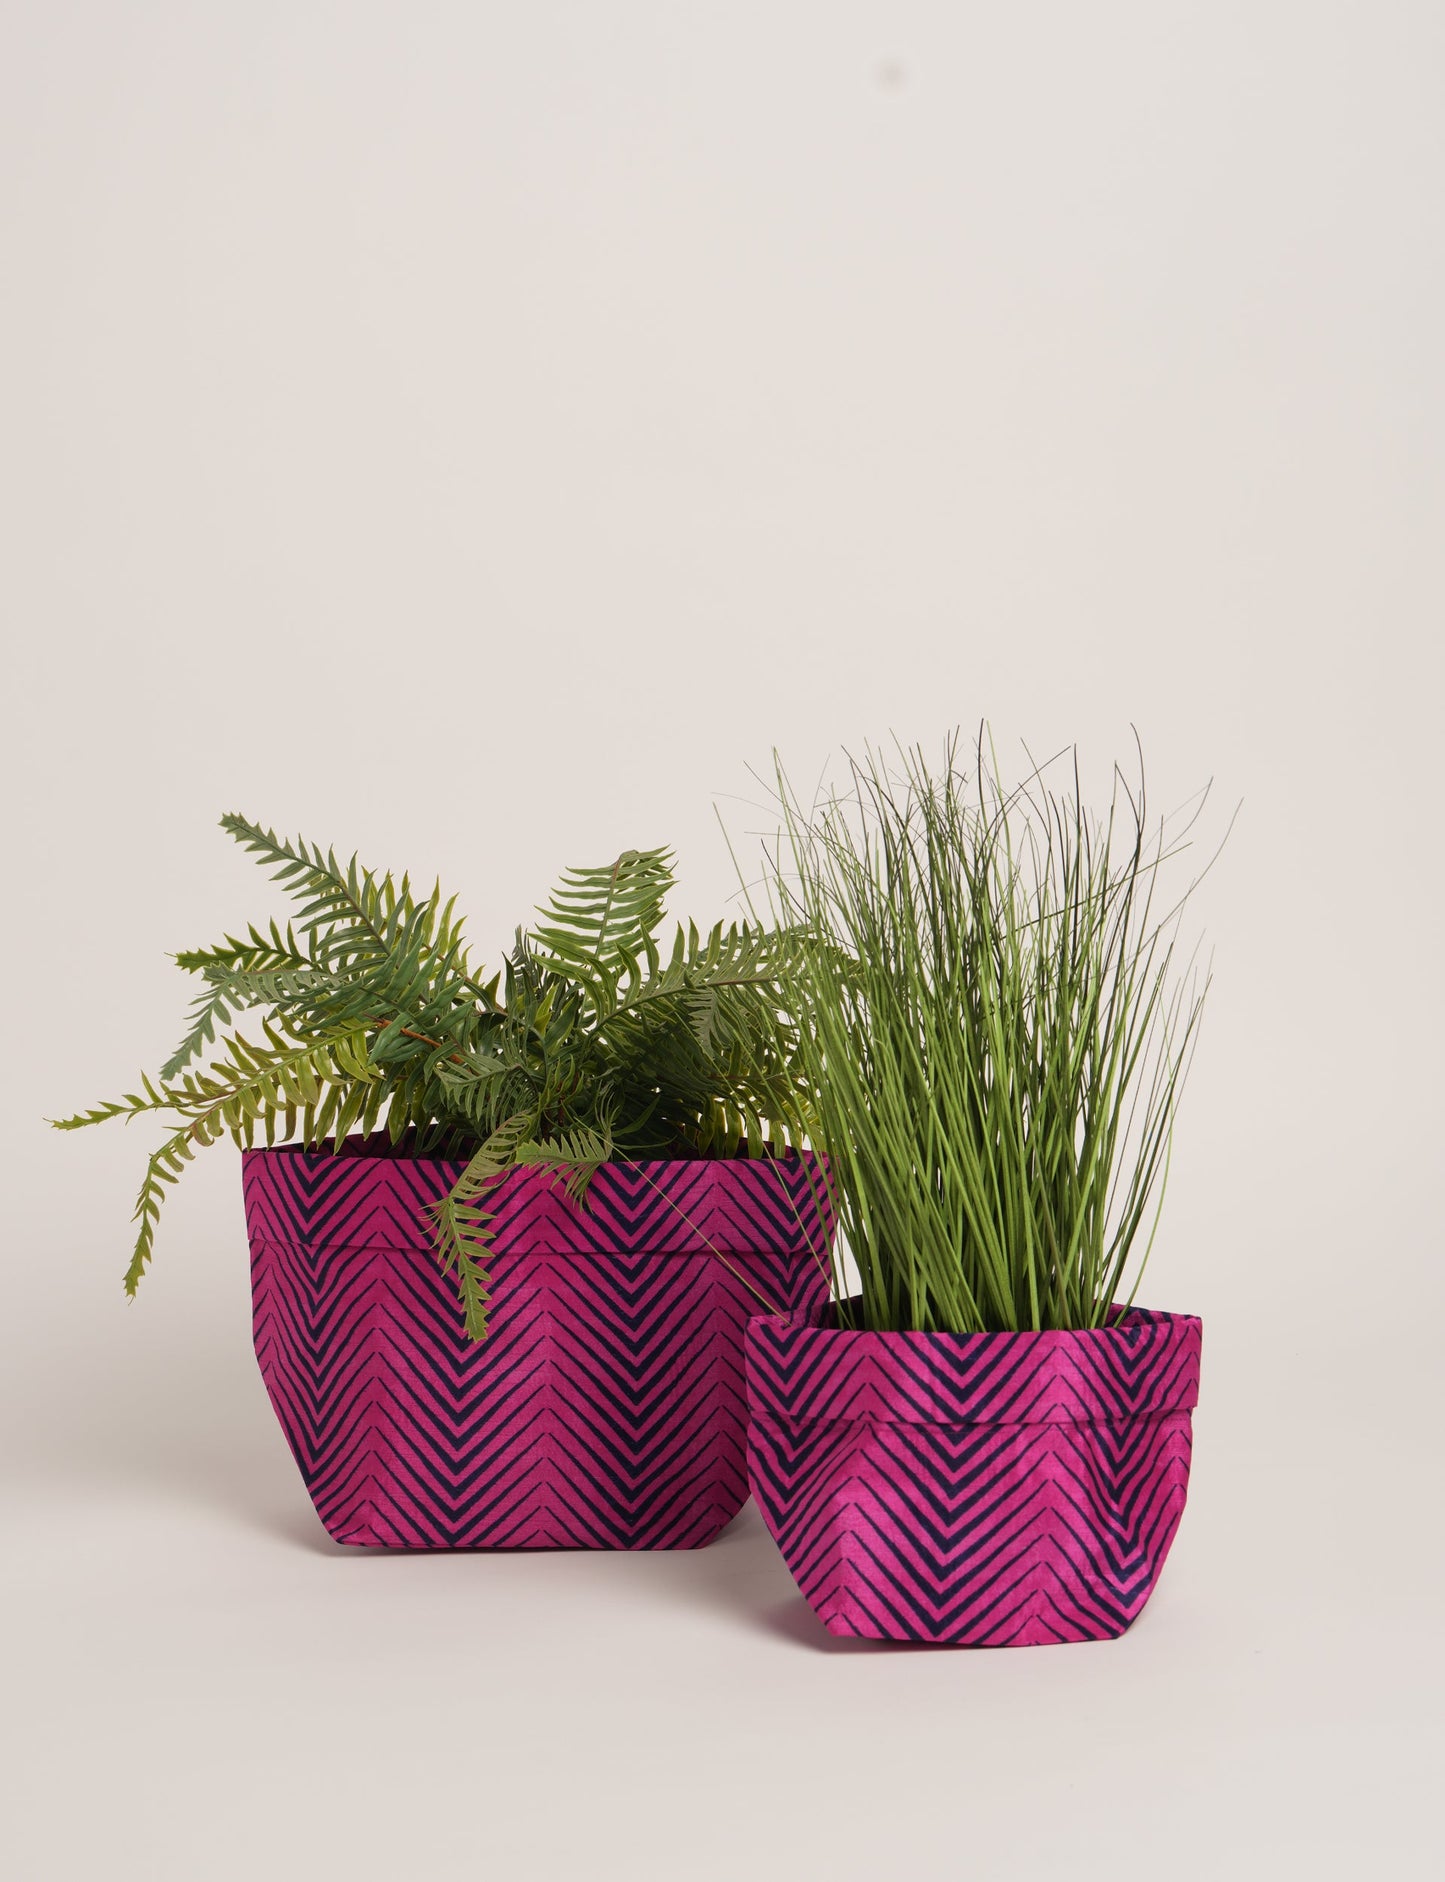 Upgrade your plant aesthetics sustainably with our PLANT POT COVER SET – two handmade covers crafted from preloved saris. Ethical and green, these covers bring eco-friendly charm to your plants and your space.